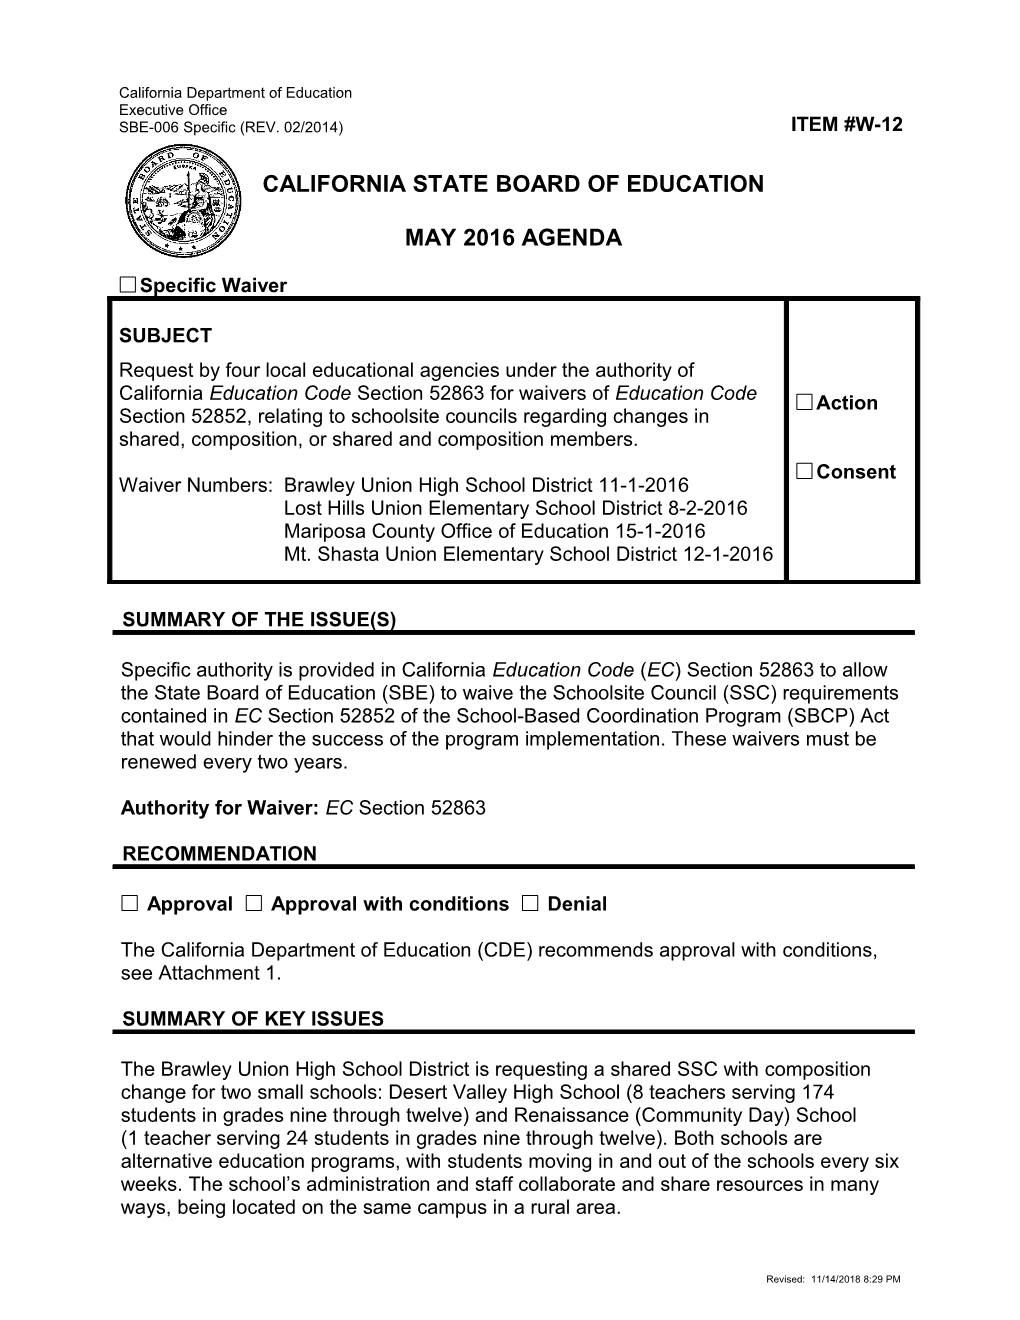 May 2016 Waiver Item W-12 - Meeting Agendas (CA State Board of Education)